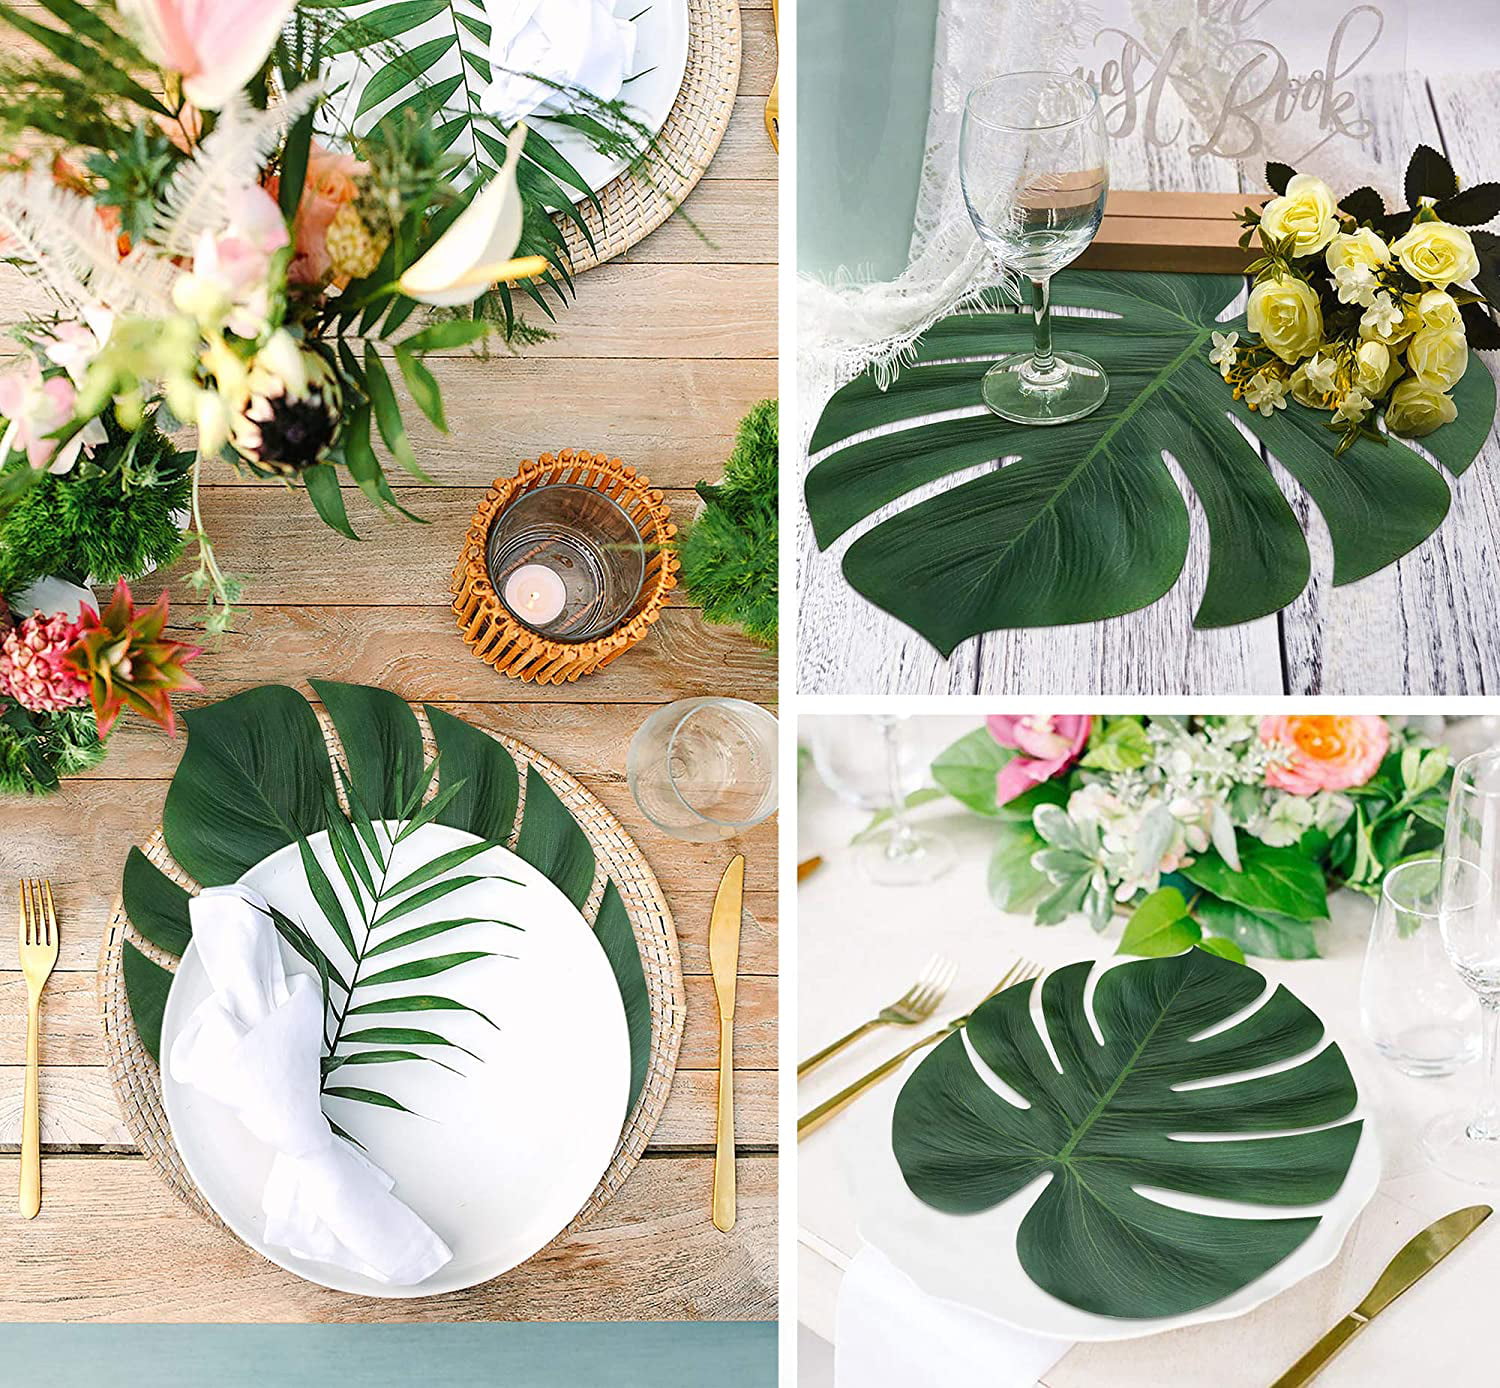 TRLYC Artificial DIY Decorations Turtle Leaf Runners Hawaiian Decorations Faux Leaves Palm Leaves Luau Party Jungle Beach Theme Party Decorations 24 pcs 